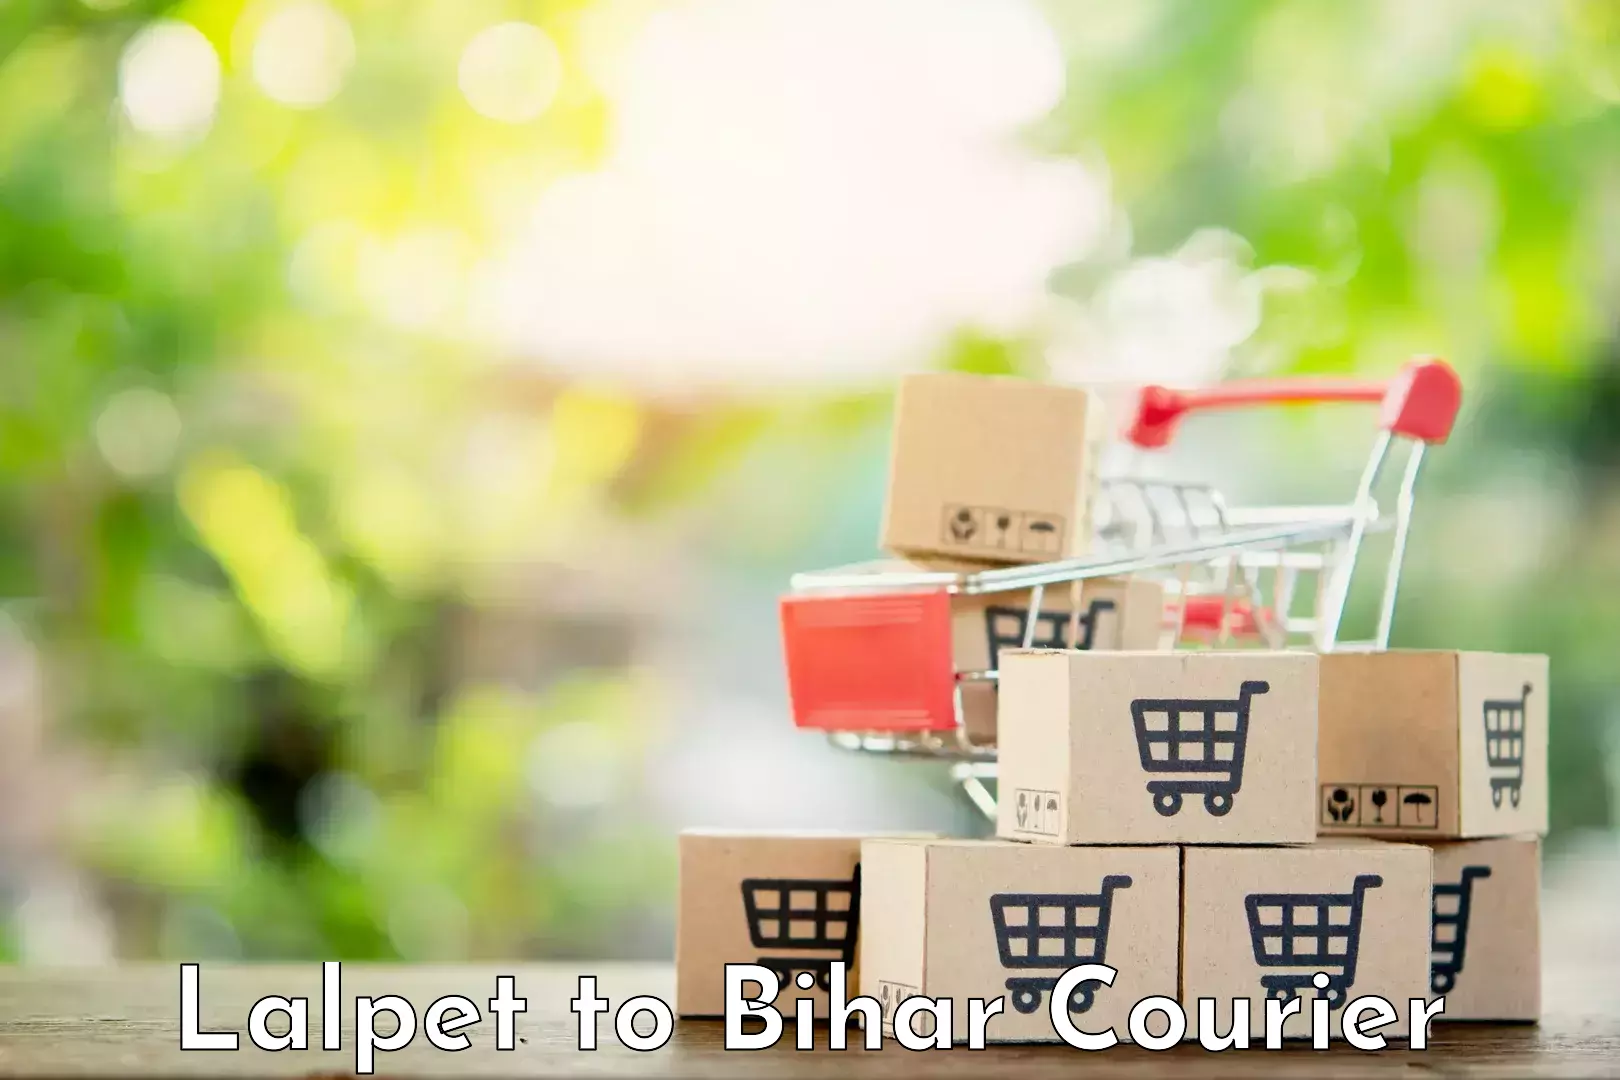 Sustainable courier practices Lalpet to Bhorey